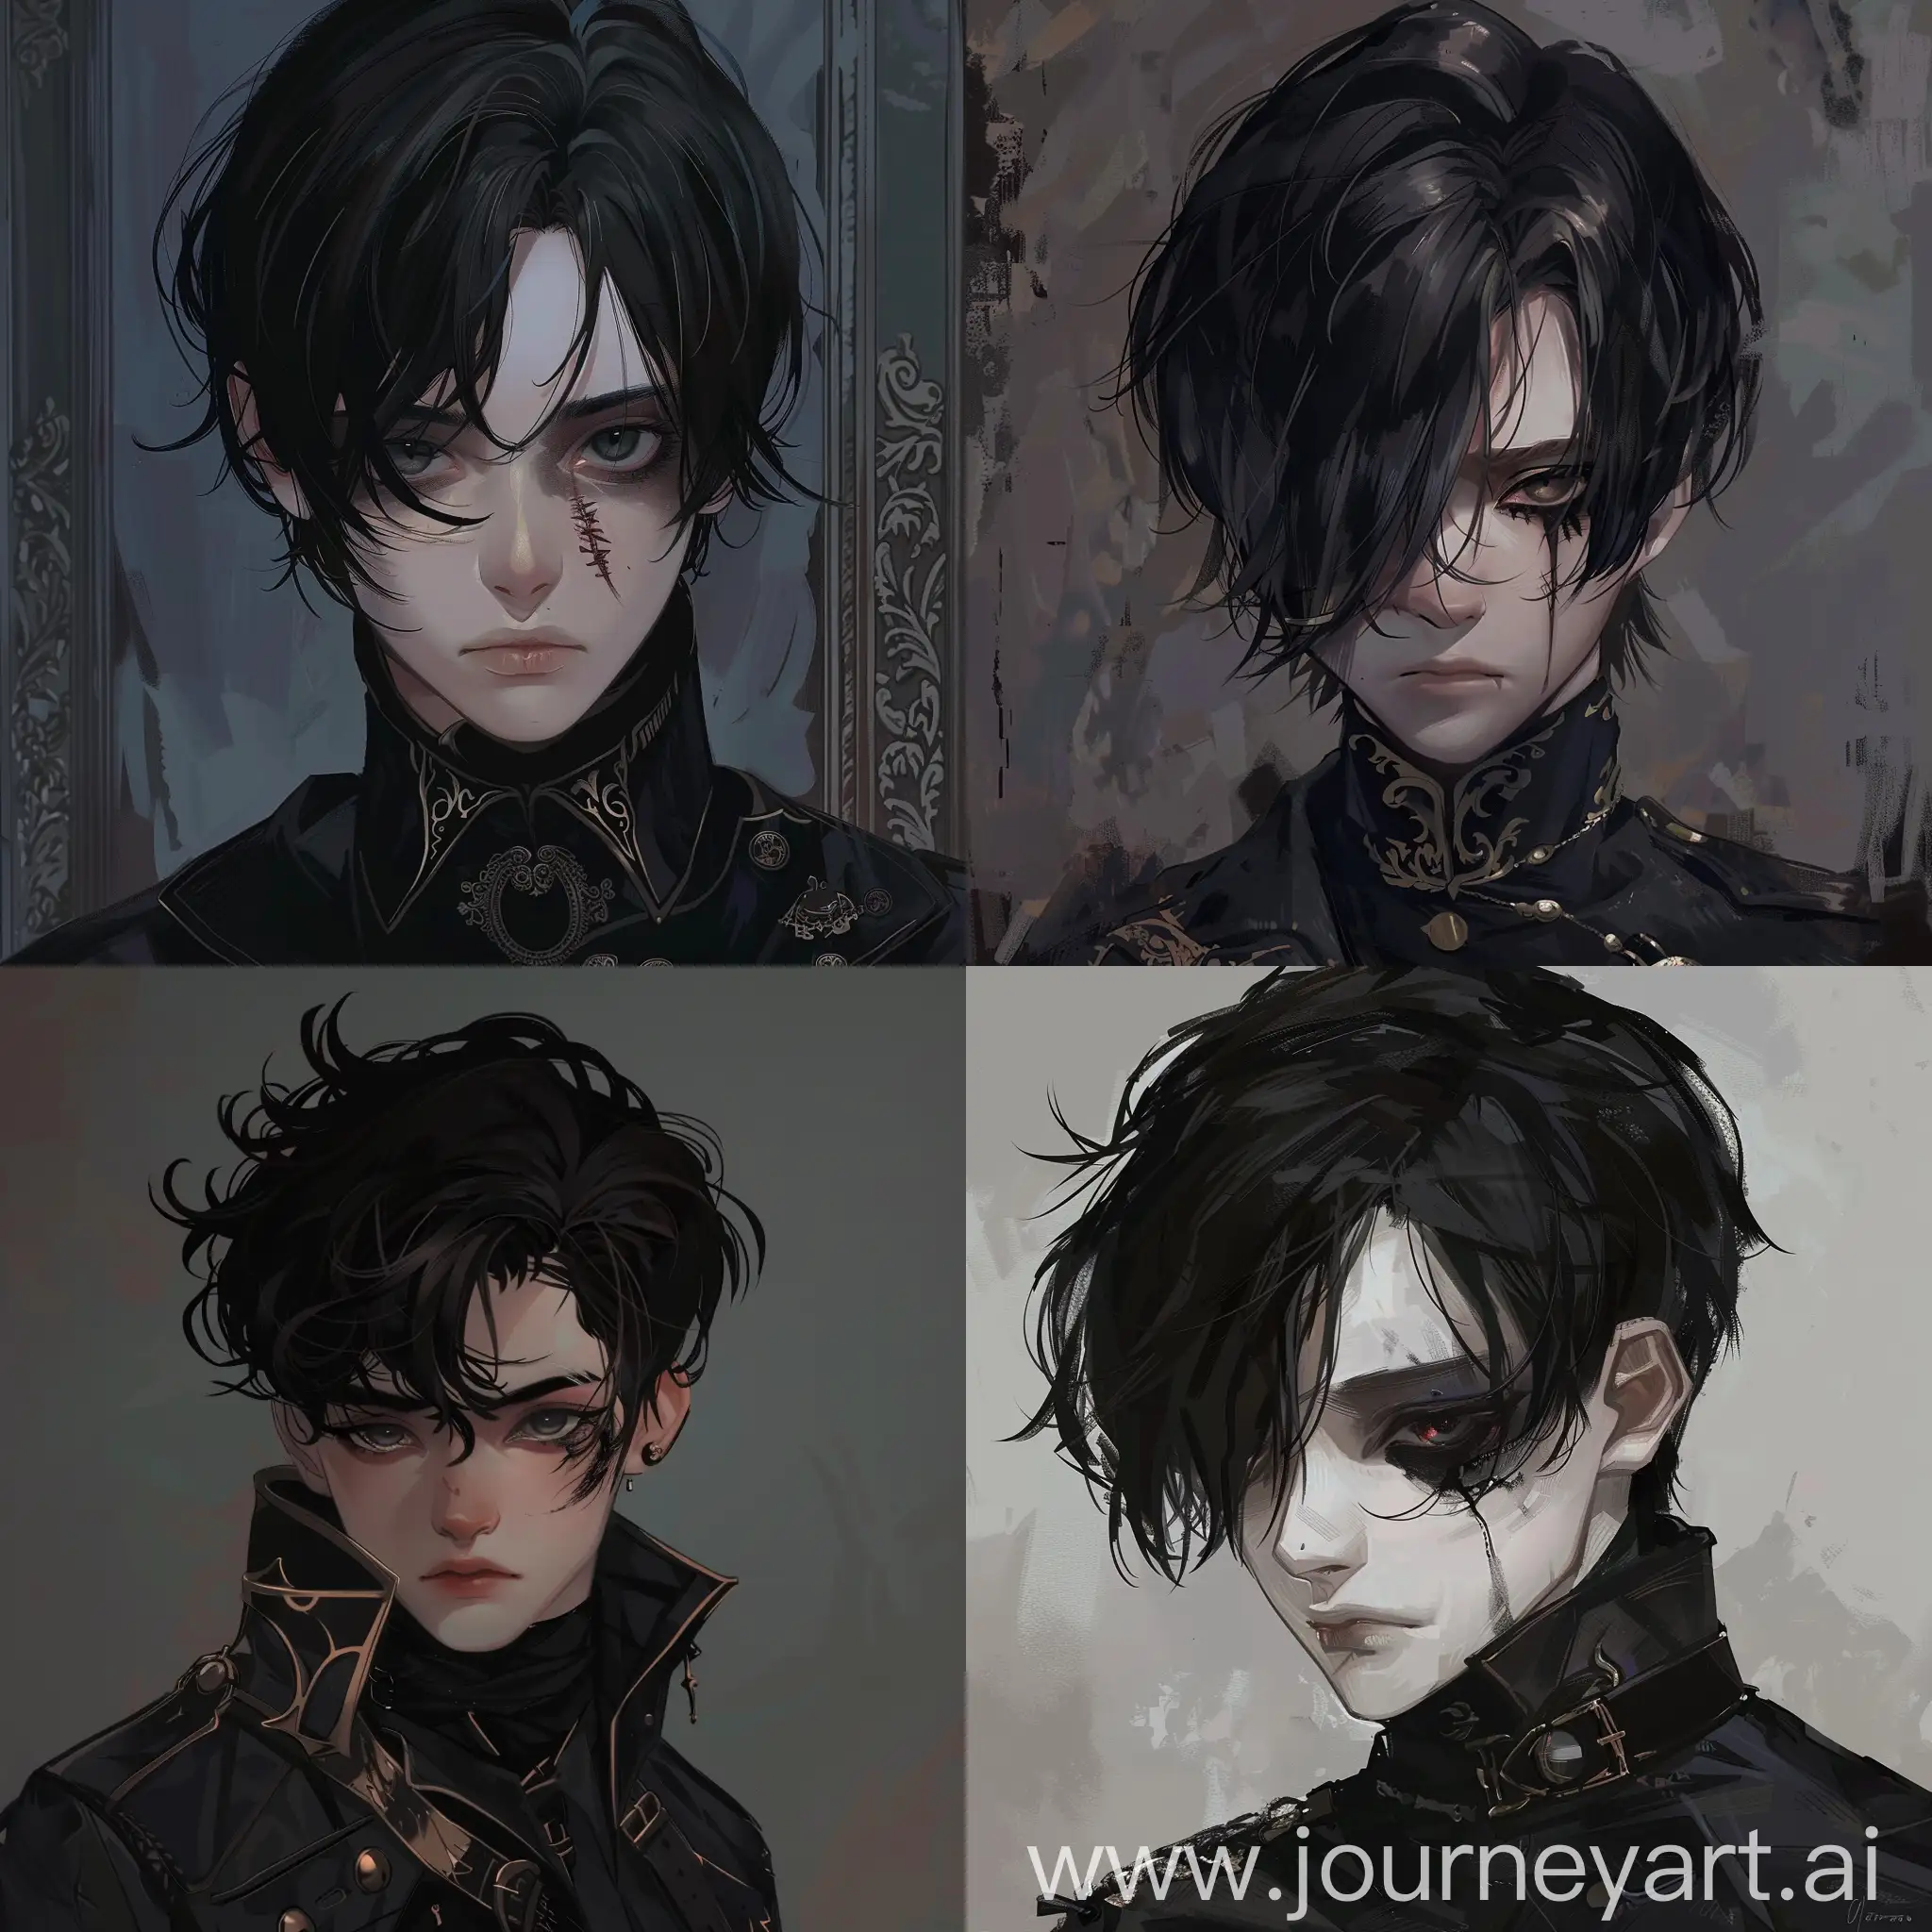 Serious-Boy-with-Scar-in-Victorian-Gothic-Anime-Style